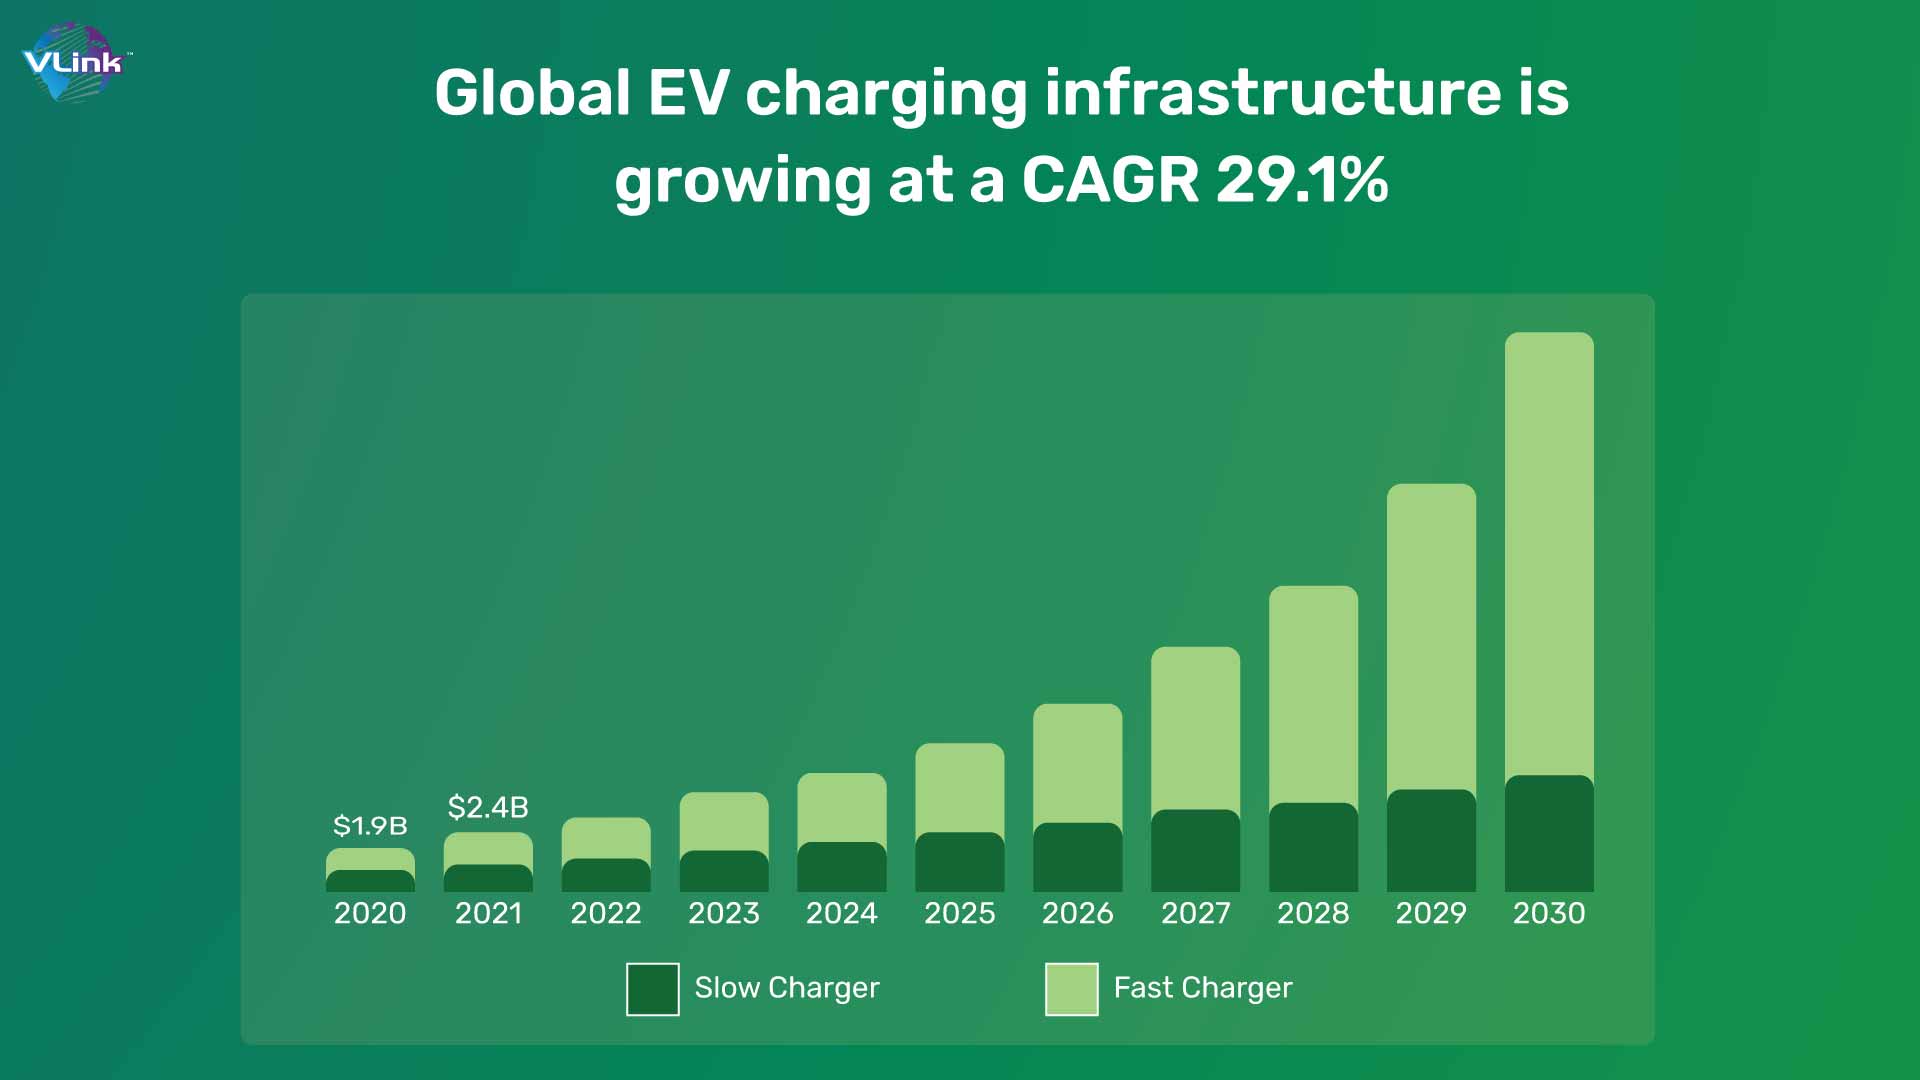 Global EV charging infrastructure is growing at a CAGR 29.1%.